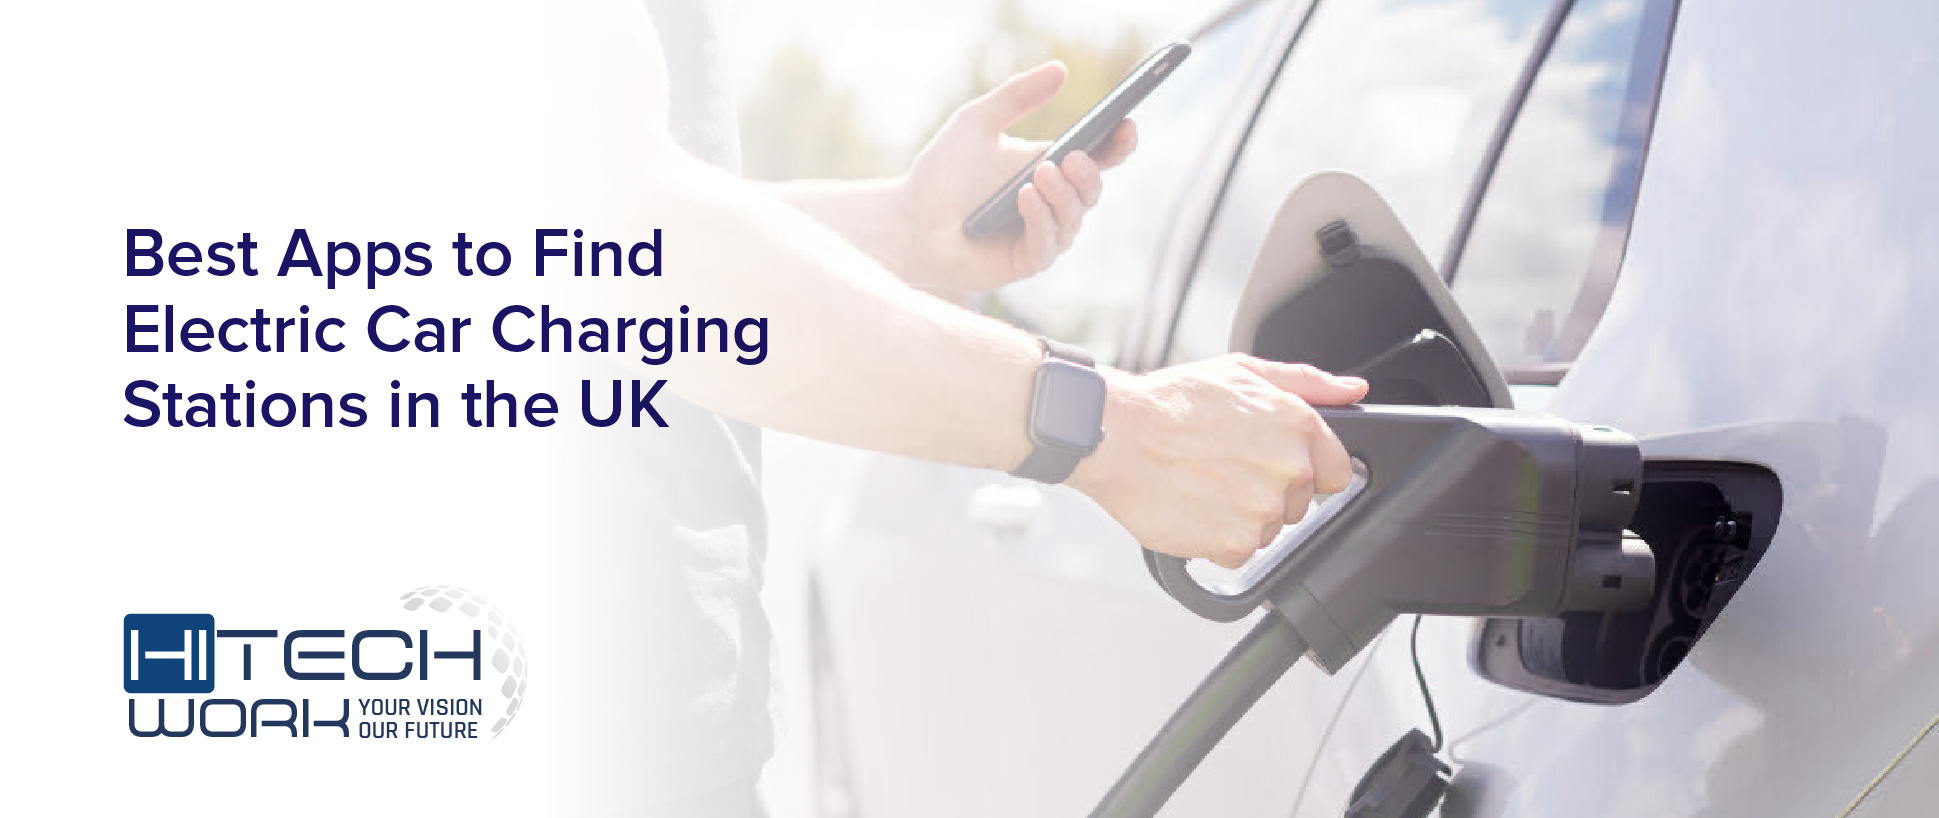 Car Charging Stations in the UK